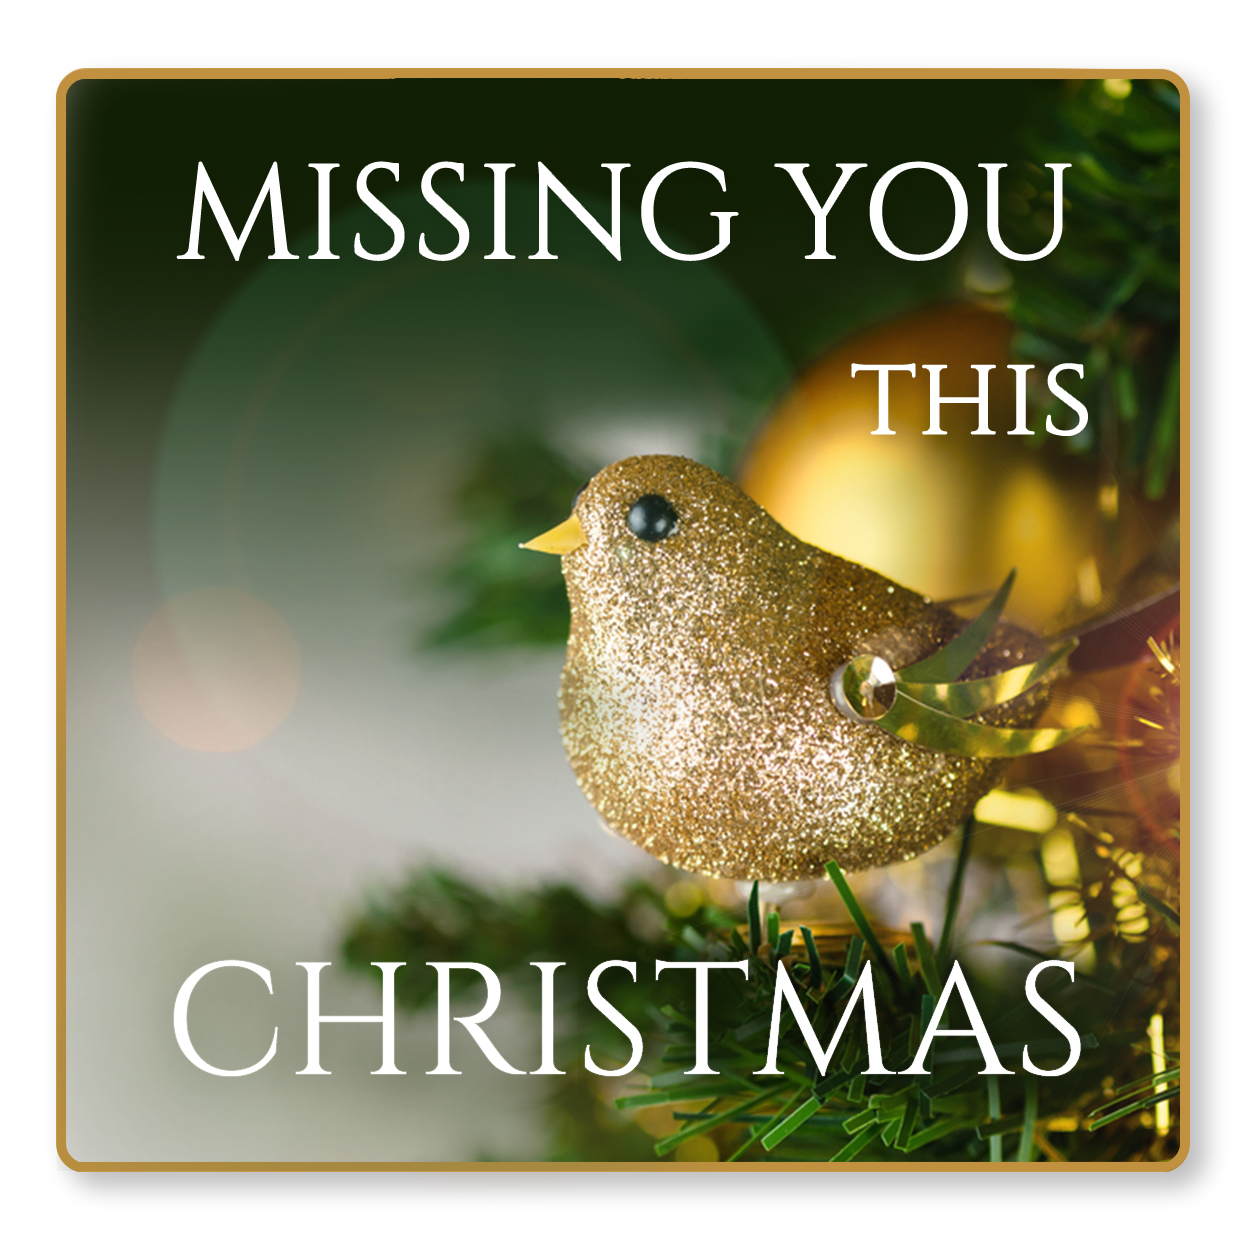 Missing You This Christmas - sent on December 16th, 2021